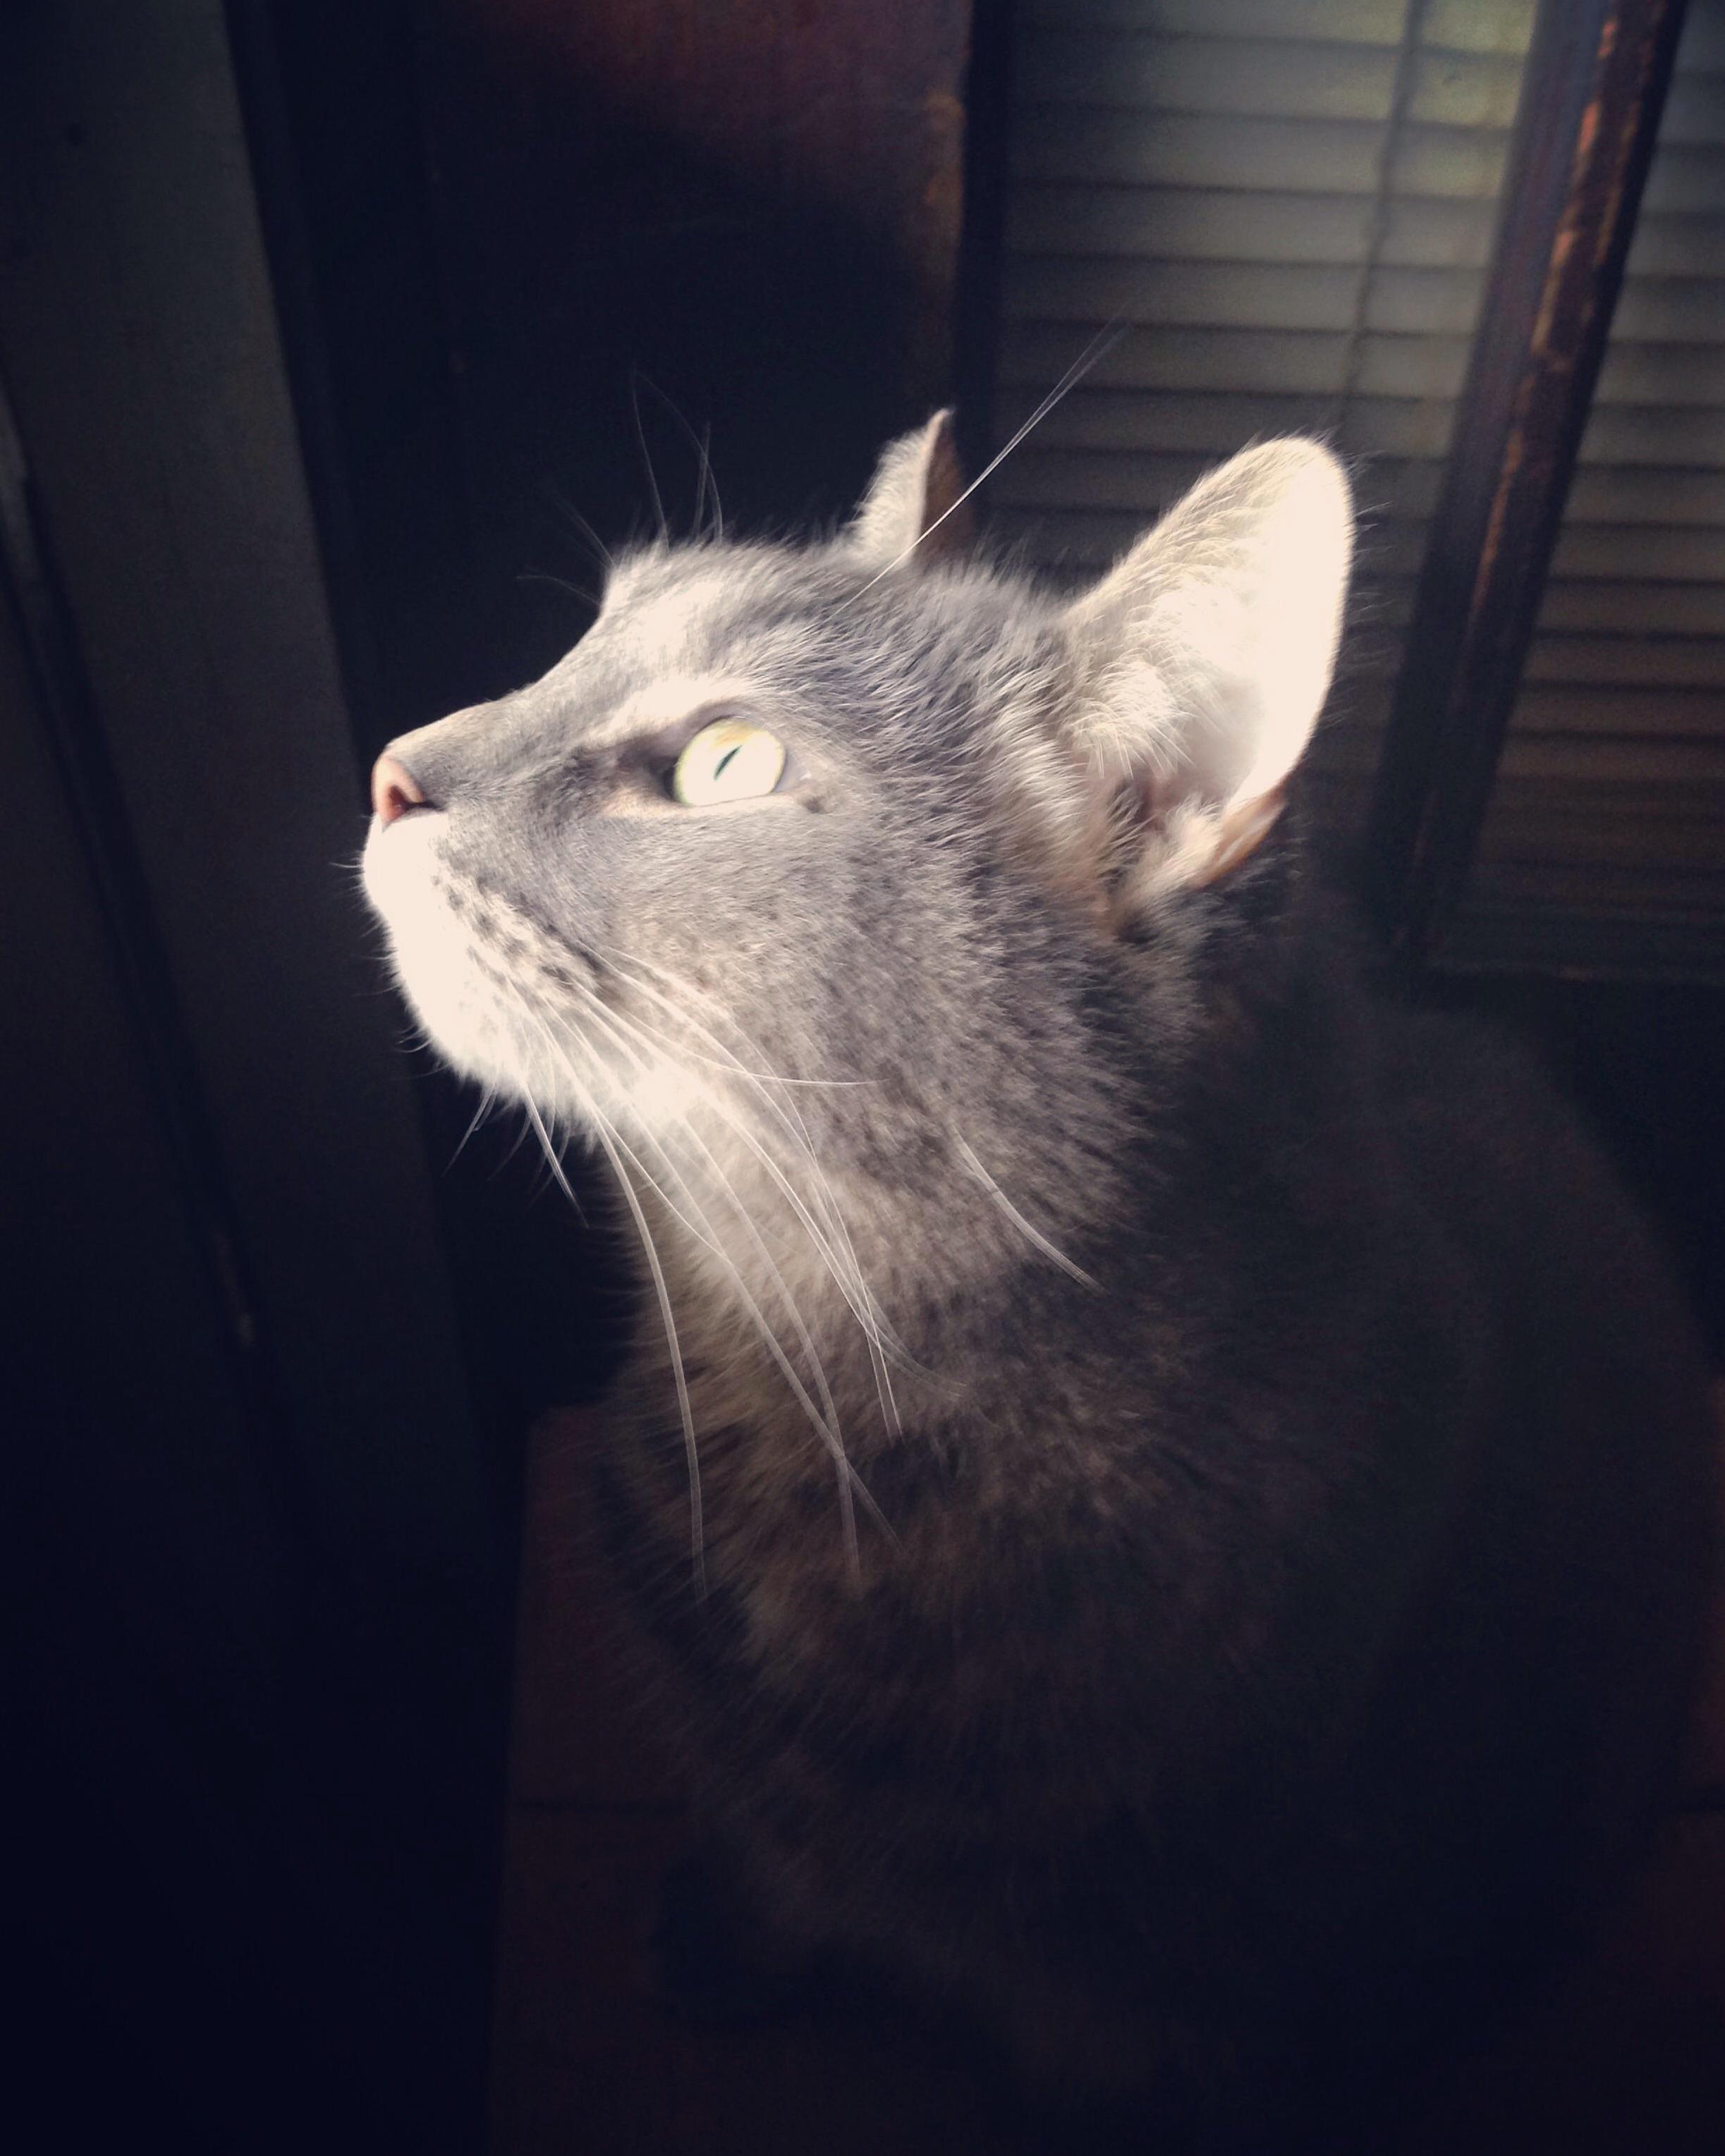 My handsome boy is almost 11 years old and very photogenic